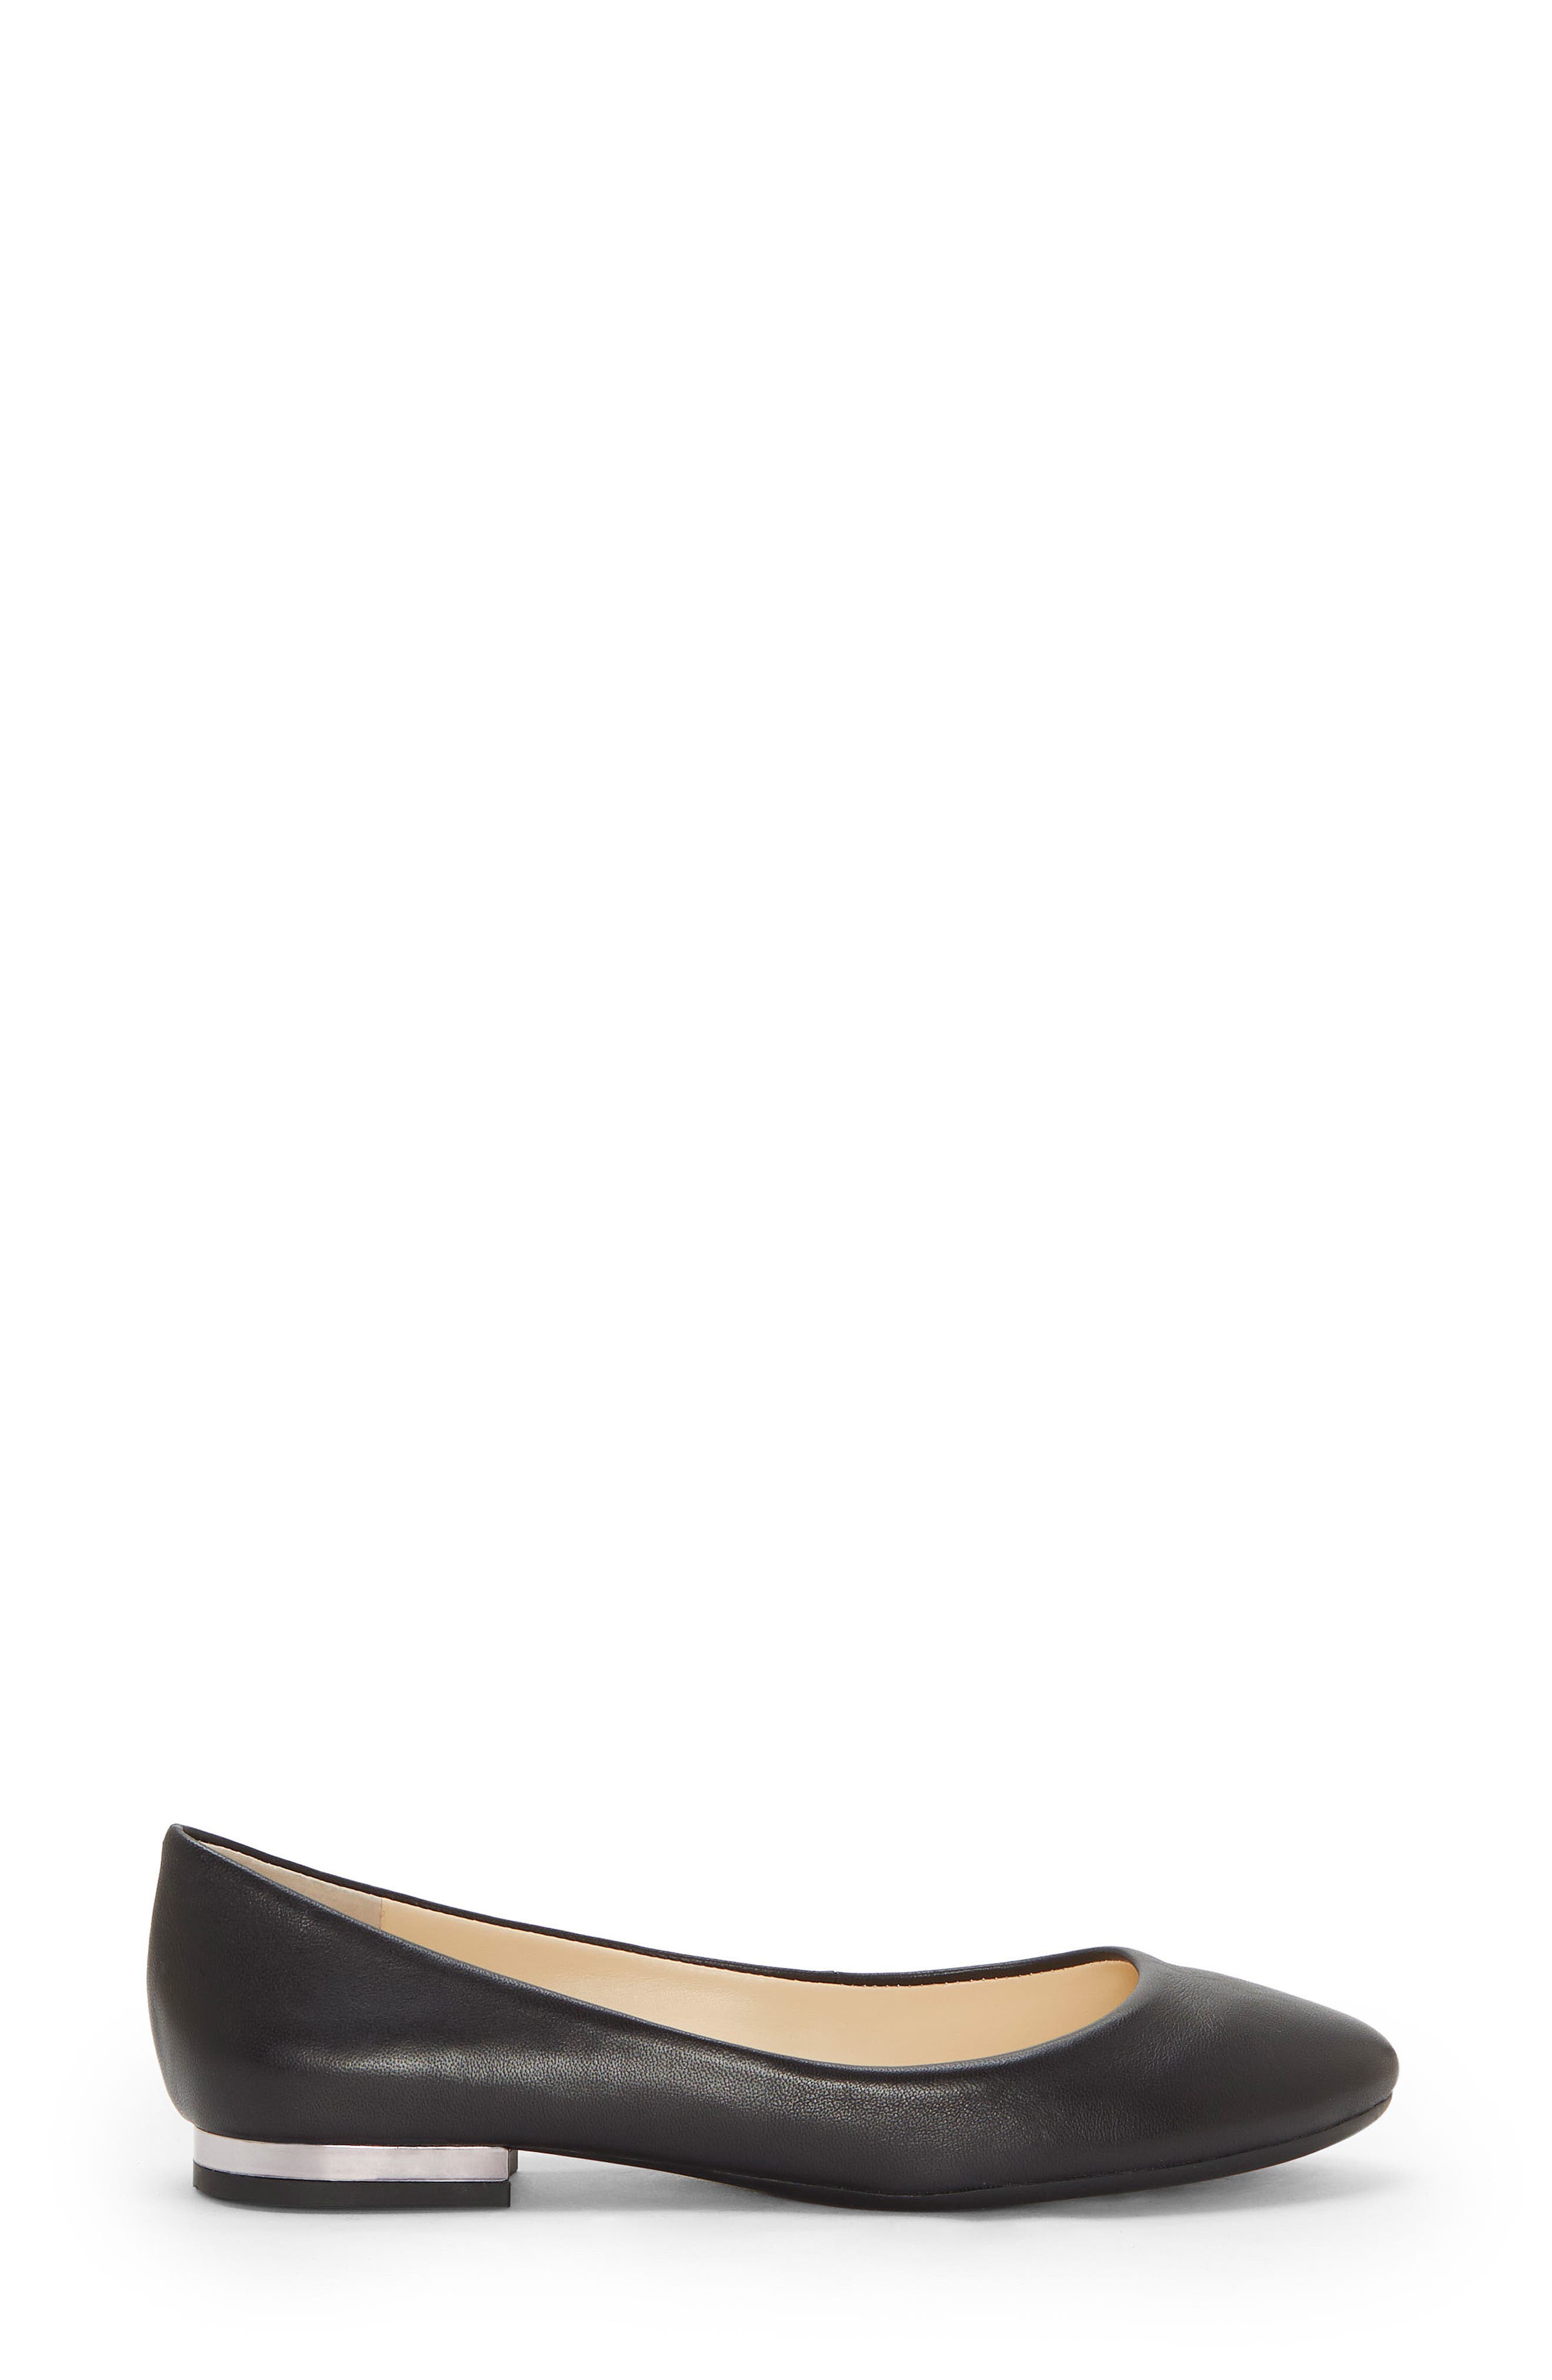 jessica simpson ginly flats